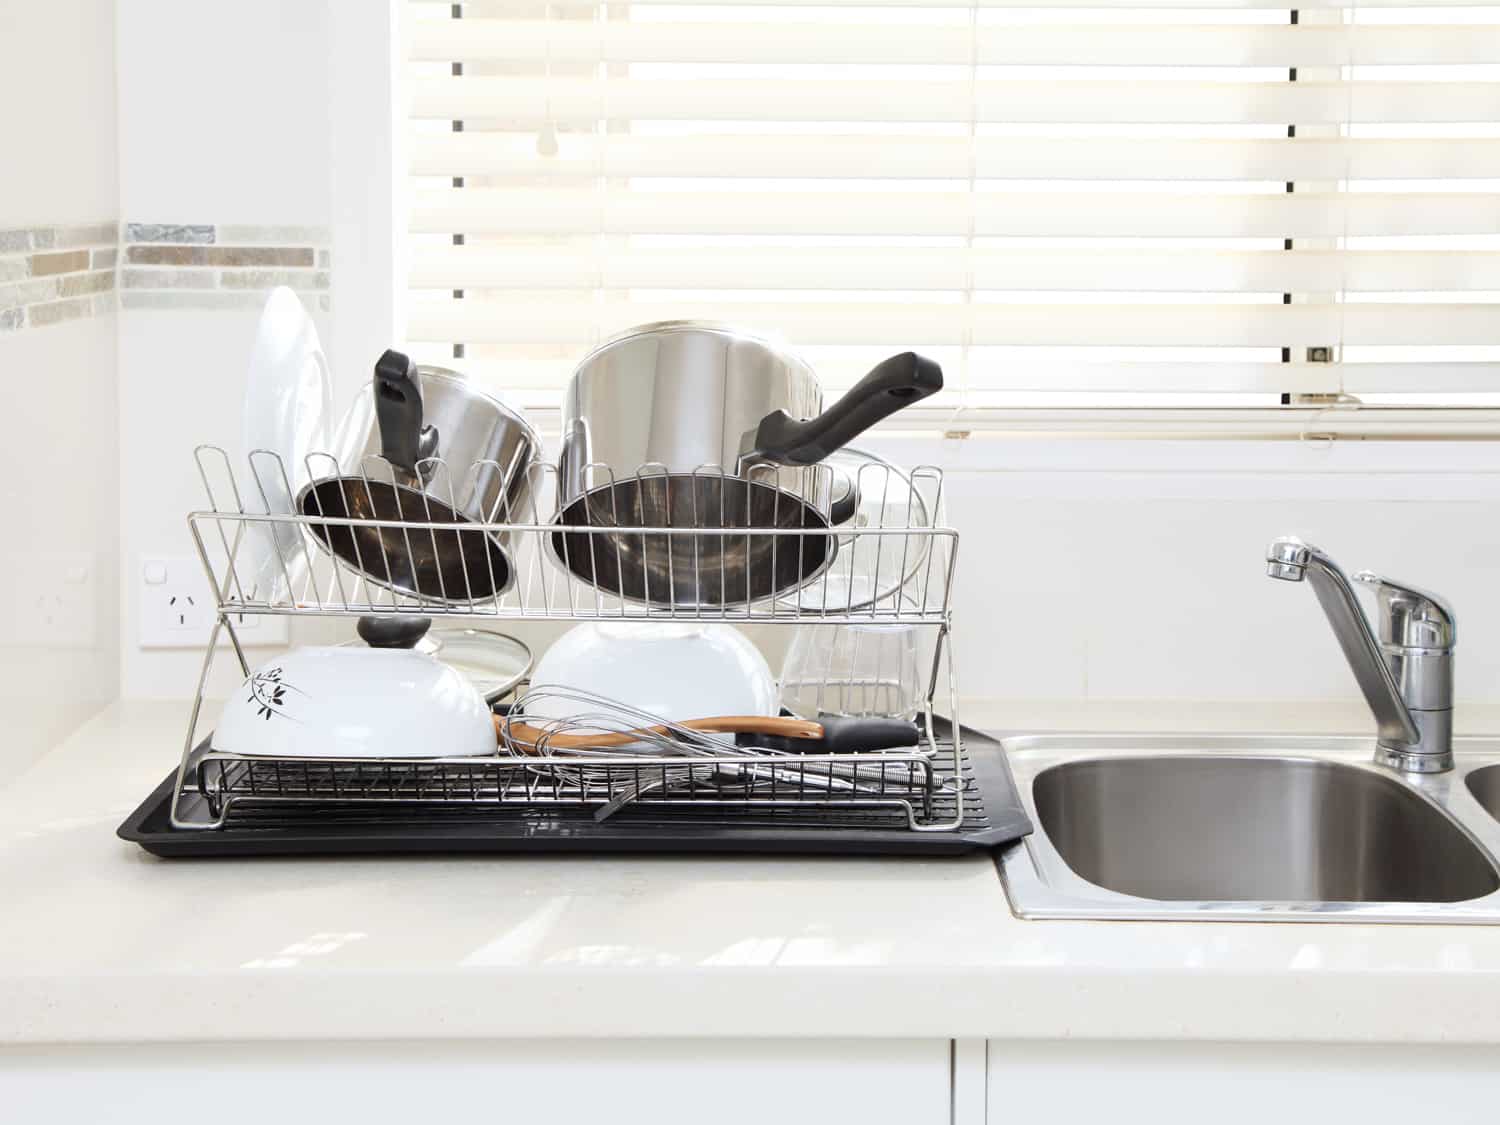 Clean dishes after washing up